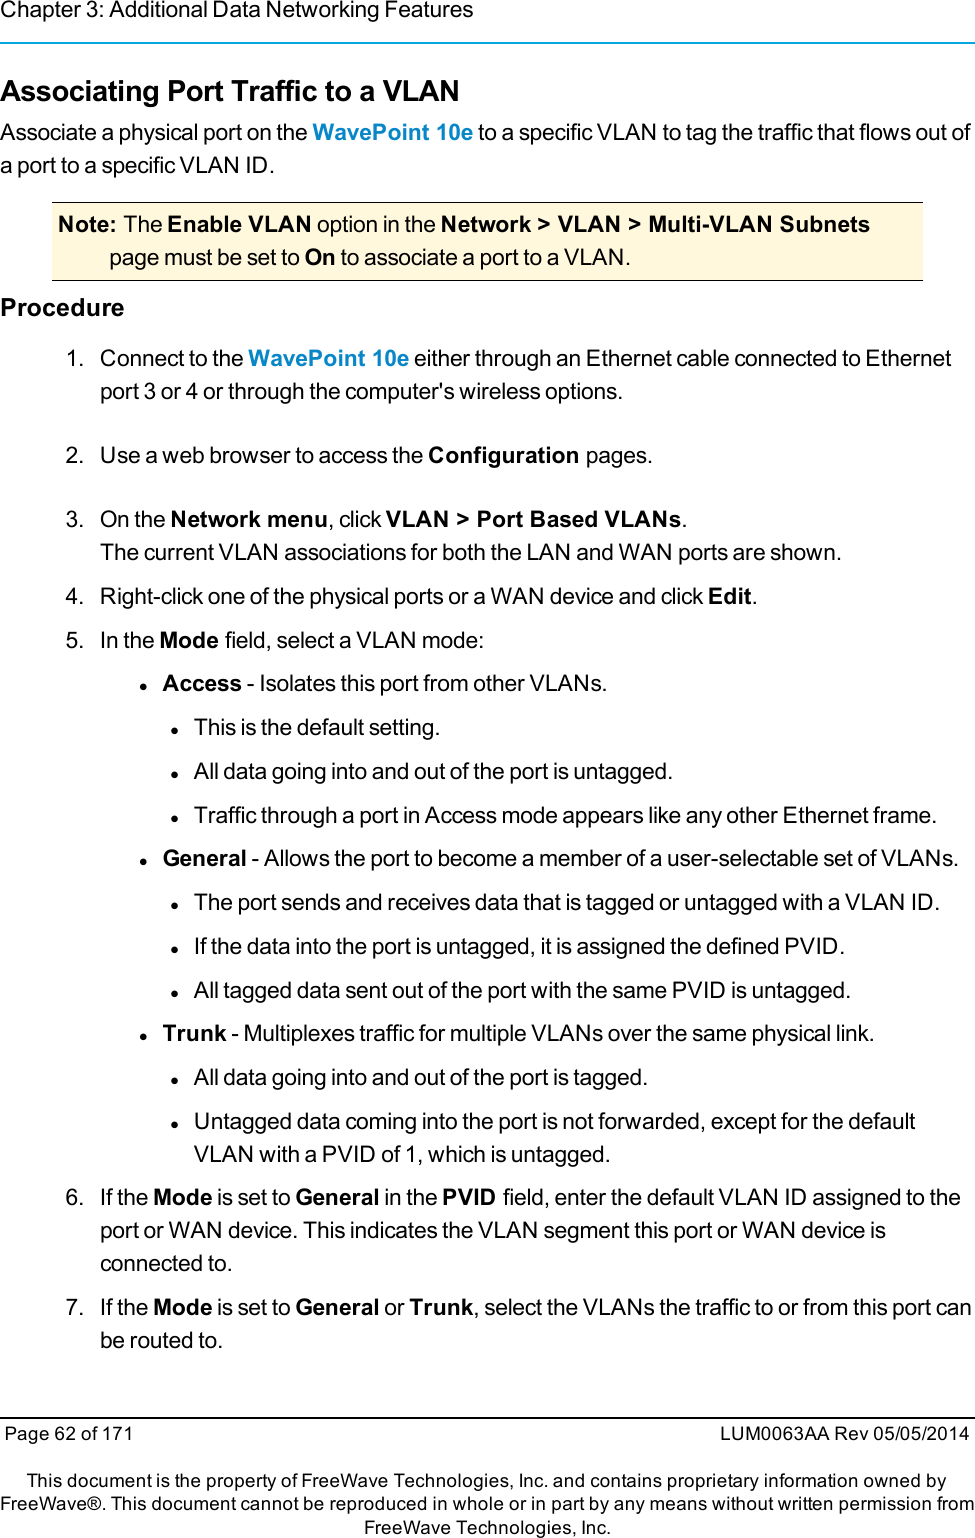 Chapter 3: Additional Data Networking FeaturesAssociating Port Traffic to a VLANAssociate a physical port on the WavePoint 10e to a specific VLAN to tag the traffic that flows out ofa port to a specific VLAN ID.Note: The Enable VLAN option in the Network &gt; VLAN &gt; Multi-VLAN Subnetspage must be set to On to associate a port to a VLAN.Procedure1. Connect to the WavePoint 10e either through an Ethernet cable connected to Ethernetport 3 or 4 or through the computer&apos;s wireless options.2. Use a web browser to access the Configuration pages.3. On the Network menu, click VLAN &gt; Port Based VLANs.The current VLAN associations for both the LAN and WAN ports are shown.4. Right-click one of the physical ports or a WAN device and click Edit.5. In the Mode field, select a VLAN mode:lAccess - Isolates this port from other VLANs.lThis is the default setting.lAll data going into and out of the port is untagged.lTraffic through a port in Access mode appears like any other Ethernet frame.lGeneral - Allows the port to become a member of a user-selectable set of VLANs.lThe port sends and receives data that is tagged or untagged with a VLAN ID.lIf the data into the port is untagged, it is assigned the defined PVID.lAll tagged data sent out of the port with the same PVID is untagged.lTrunk - Multiplexes traffic for multiple VLANs over the same physical link.lAll data going into and out of the port is tagged.lUntagged data coming into the port is not forwarded, except for the defaultVLAN with a PVID of 1, which is untagged.6. If the Mode is set to General in the PVID field, enter the default VLAN ID assigned to theport or WAN device. This indicates the VLAN segment this port or WAN device isconnected to.7. If the Mode is set to General or Trunk, select the VLANs the traffic to or from this port canbe routed to.Page 62 of 171 LUM0063AA Rev 05/05/2014This document is the property of FreeWave Technologies, Inc. and contains proprietary information owned byFreeWave®. This document cannot be reproduced in whole or in part by any means without written permission fromFreeWave Technologies, Inc.